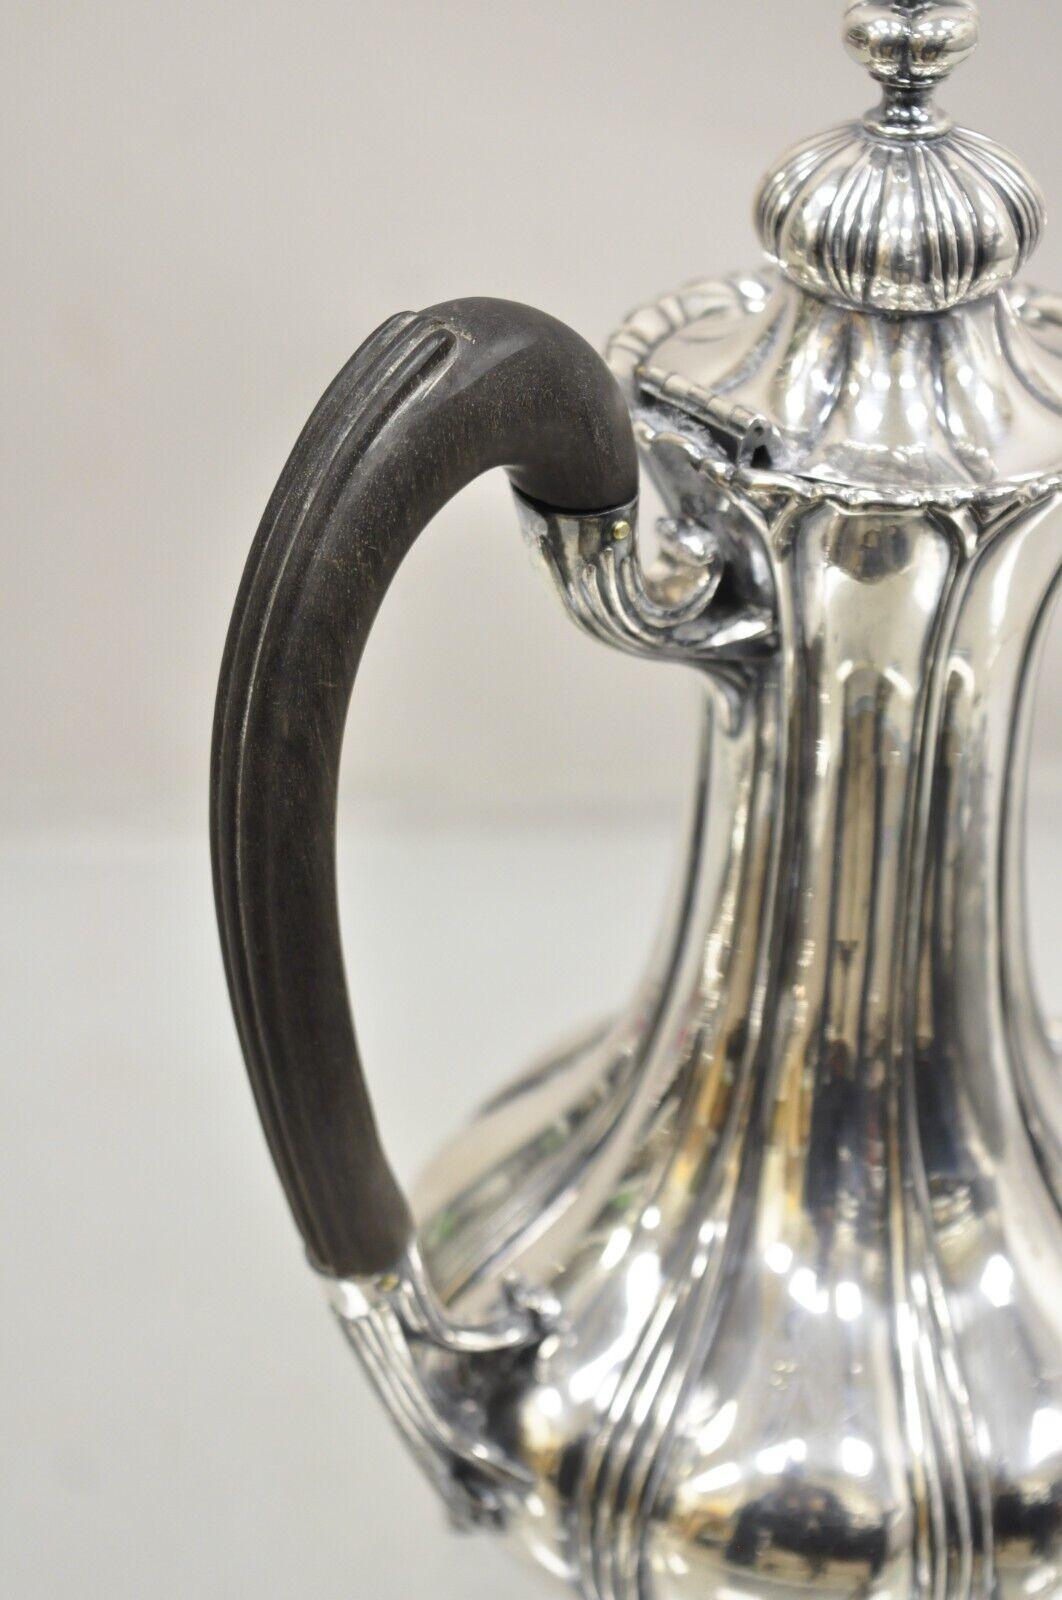 Antique Pairpoint Mfg Victorian Silver Plated Tea Pot Coffee Pot w/ Wood Handle In Good Condition For Sale In Philadelphia, PA